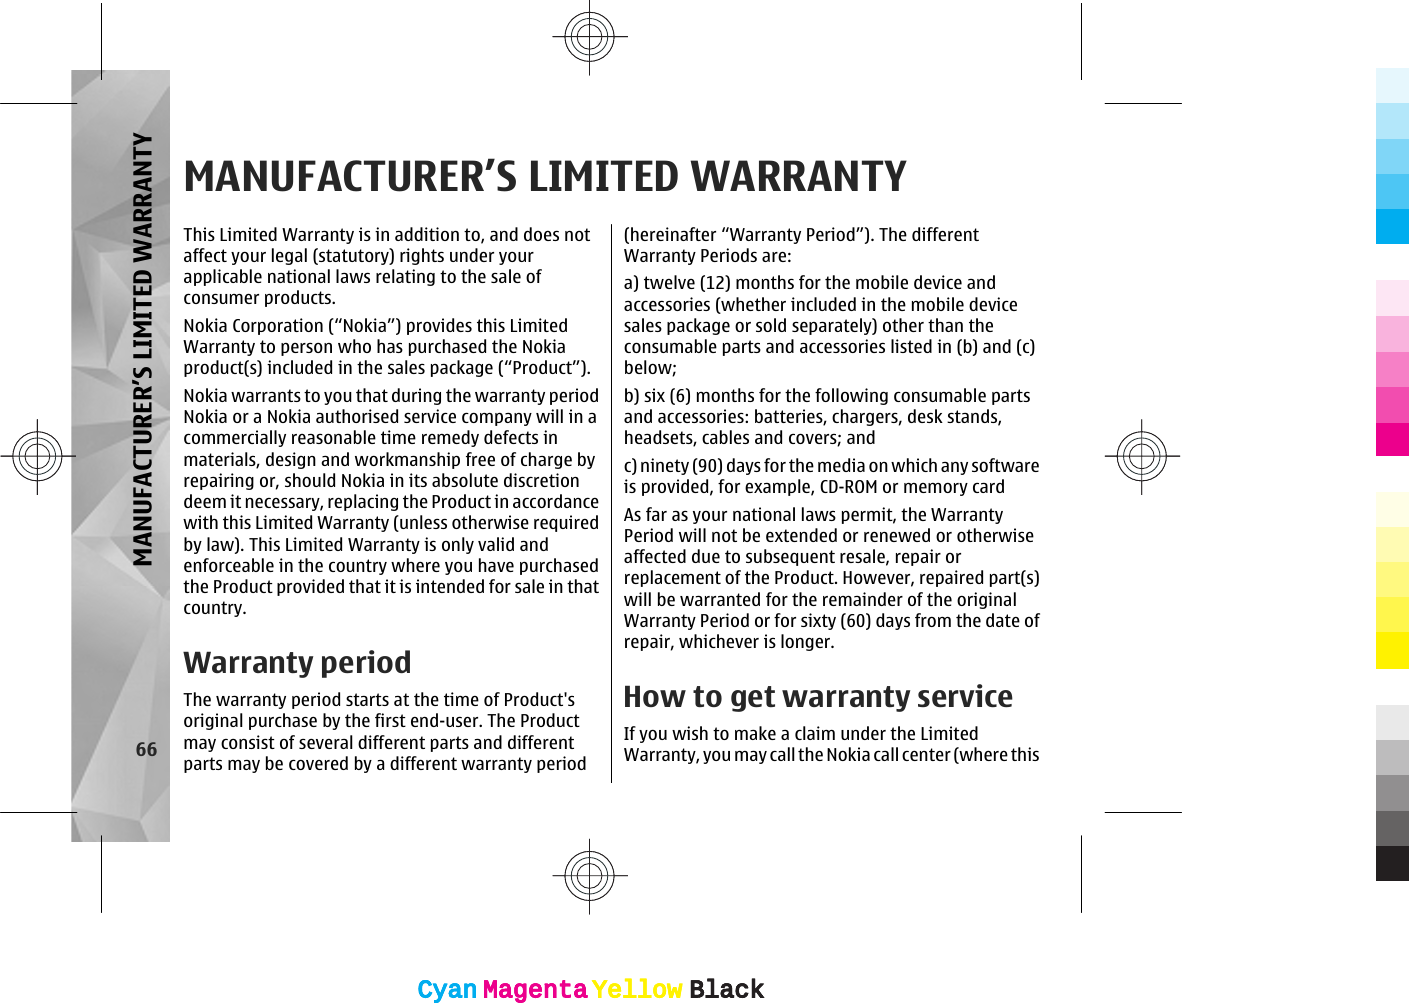 MANUFACTURER’S LIMITED WARRANTYThis Limited Warranty is in addition to, and does notaffect your legal (statutory) rights under yourapplicable national laws relating to the sale ofconsumer products.Nokia Corporation (“Nokia”) provides this LimitedWarranty to person who has purchased the Nokiaproduct(s) included in the sales package (“Product”).Nokia warrants to you that during the warranty periodNokia or a Nokia authorised service company will in acommercially reasonable time remedy defects inmaterials, design and workmanship free of charge byrepairing or, should Nokia in its absolute discretiondeem it necessary, replacing the Product in accordancewith this Limited Warranty (unless otherwise requiredby law). This Limited Warranty is only valid andenforceable in the country where you have purchasedthe Product provided that it is intended for sale in thatcountry.Warranty periodThe warranty period starts at the time of Product&apos;soriginal purchase by the first end-user. The Productmay consist of several different parts and differentparts may be covered by a different warranty period(hereinafter “Warranty Period”). The differentWarranty Periods are:a) twelve (12) months for the mobile device andaccessories (whether included in the mobile devicesales package or sold separately) other than theconsumable parts and accessories listed in (b) and (c)below;b) six (6) months for the following consumable partsand accessories: batteries, chargers, desk stands,headsets, cables and covers; andc) ninety (90) days for the media on which any softwareis provided, for example, CD-ROM or memory cardAs far as your national laws permit, the WarrantyPeriod will not be extended or renewed or otherwiseaffected due to subsequent resale, repair orreplacement of the Product. However, repaired part(s)will be warranted for the remainder of the originalWarranty Period or for sixty (60) days from the date ofrepair, whichever is longer.How to get warranty serviceIf you wish to make a claim under the LimitedWarranty, you may call the Nokia call center (where this66MANUFACTURER’S LIMITED WARRANTYCyanCyanMagentaMagentaYellowYellowBlackBlackCyanCyanMagentaMagentaYellowYellowBlackBlack